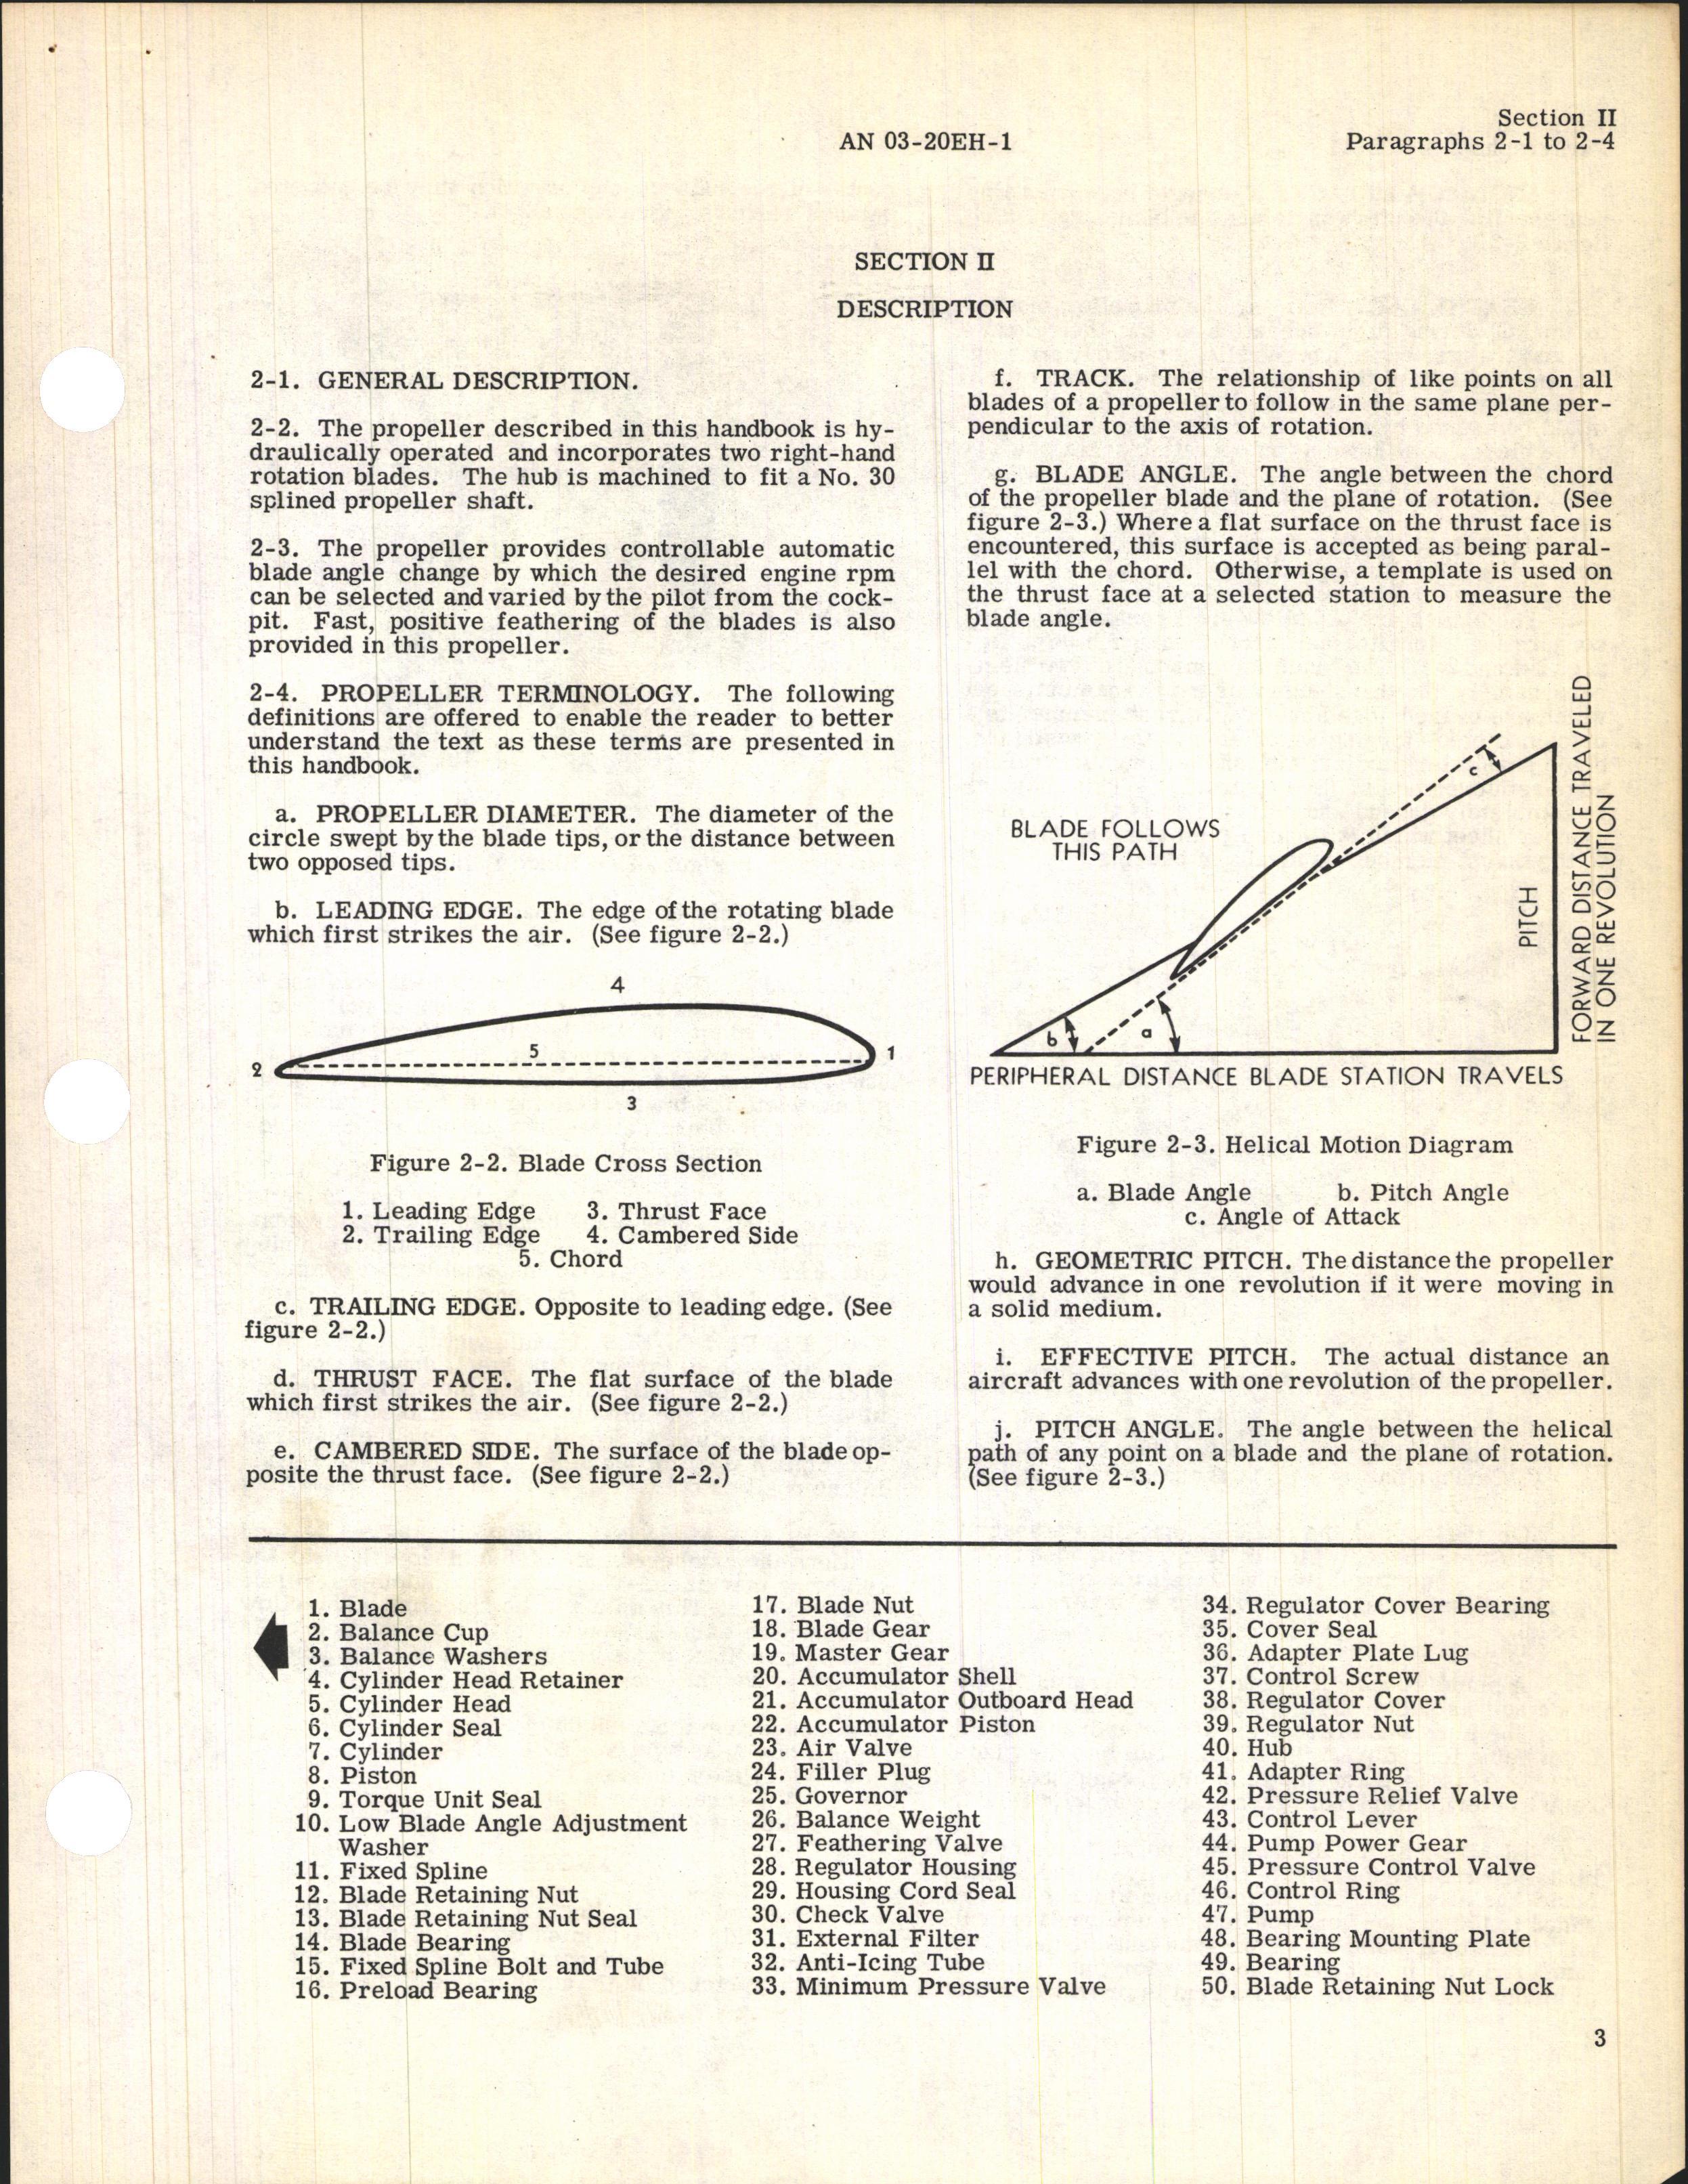 Sample page 7 from AirCorps Library document: Operation & Service Instructions for Hydraulic Propeller Model A322F-A1